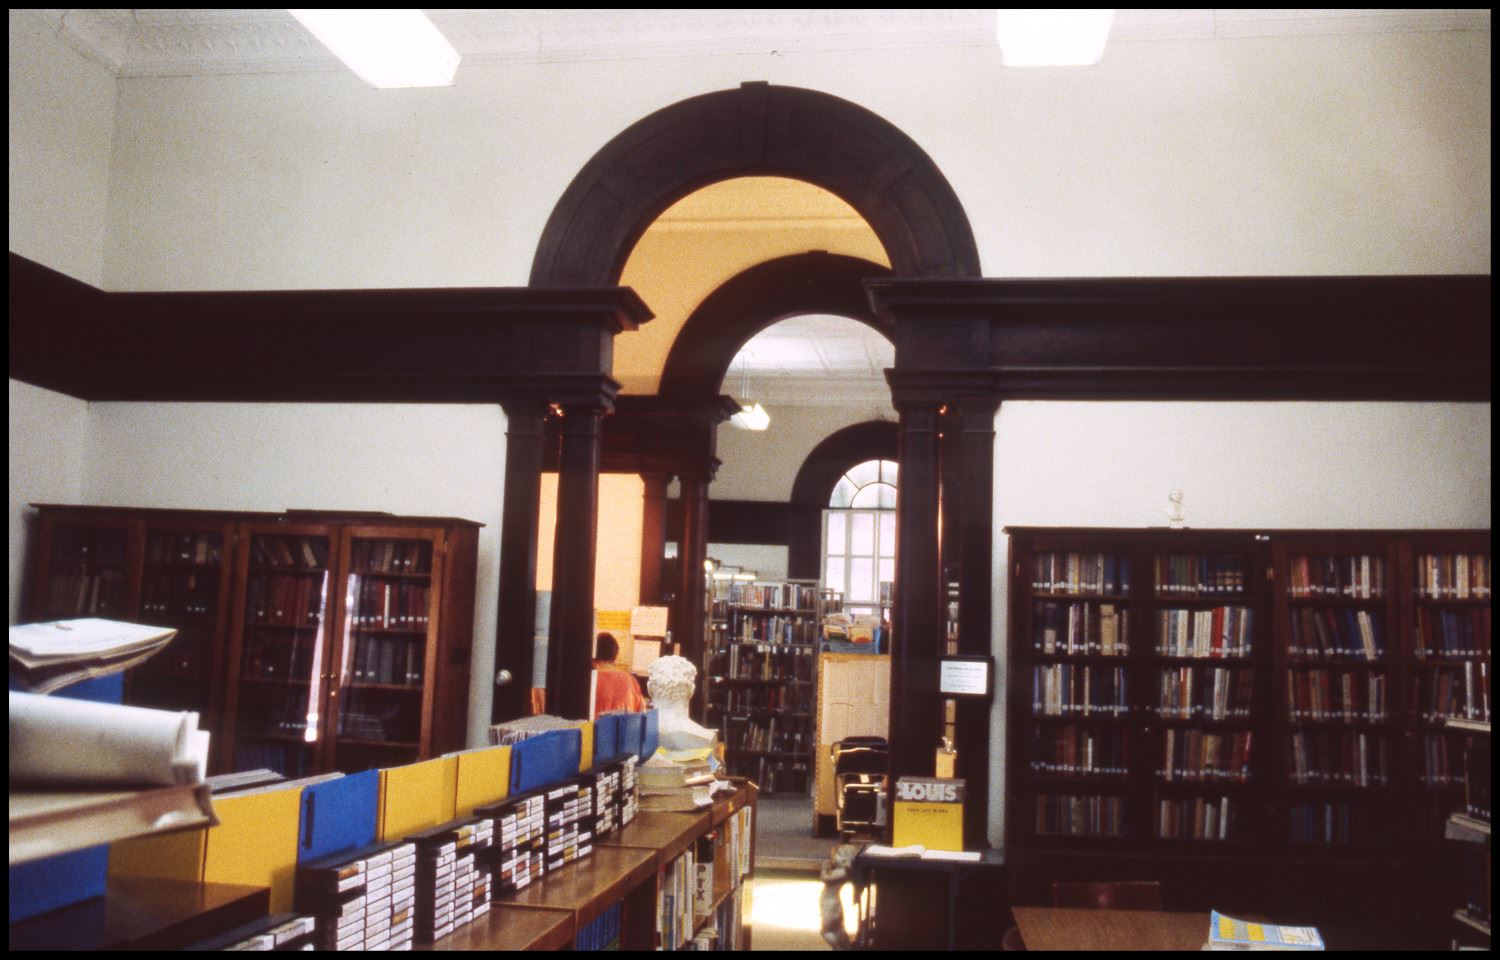 Interior of the Carnegie Library - 1970s